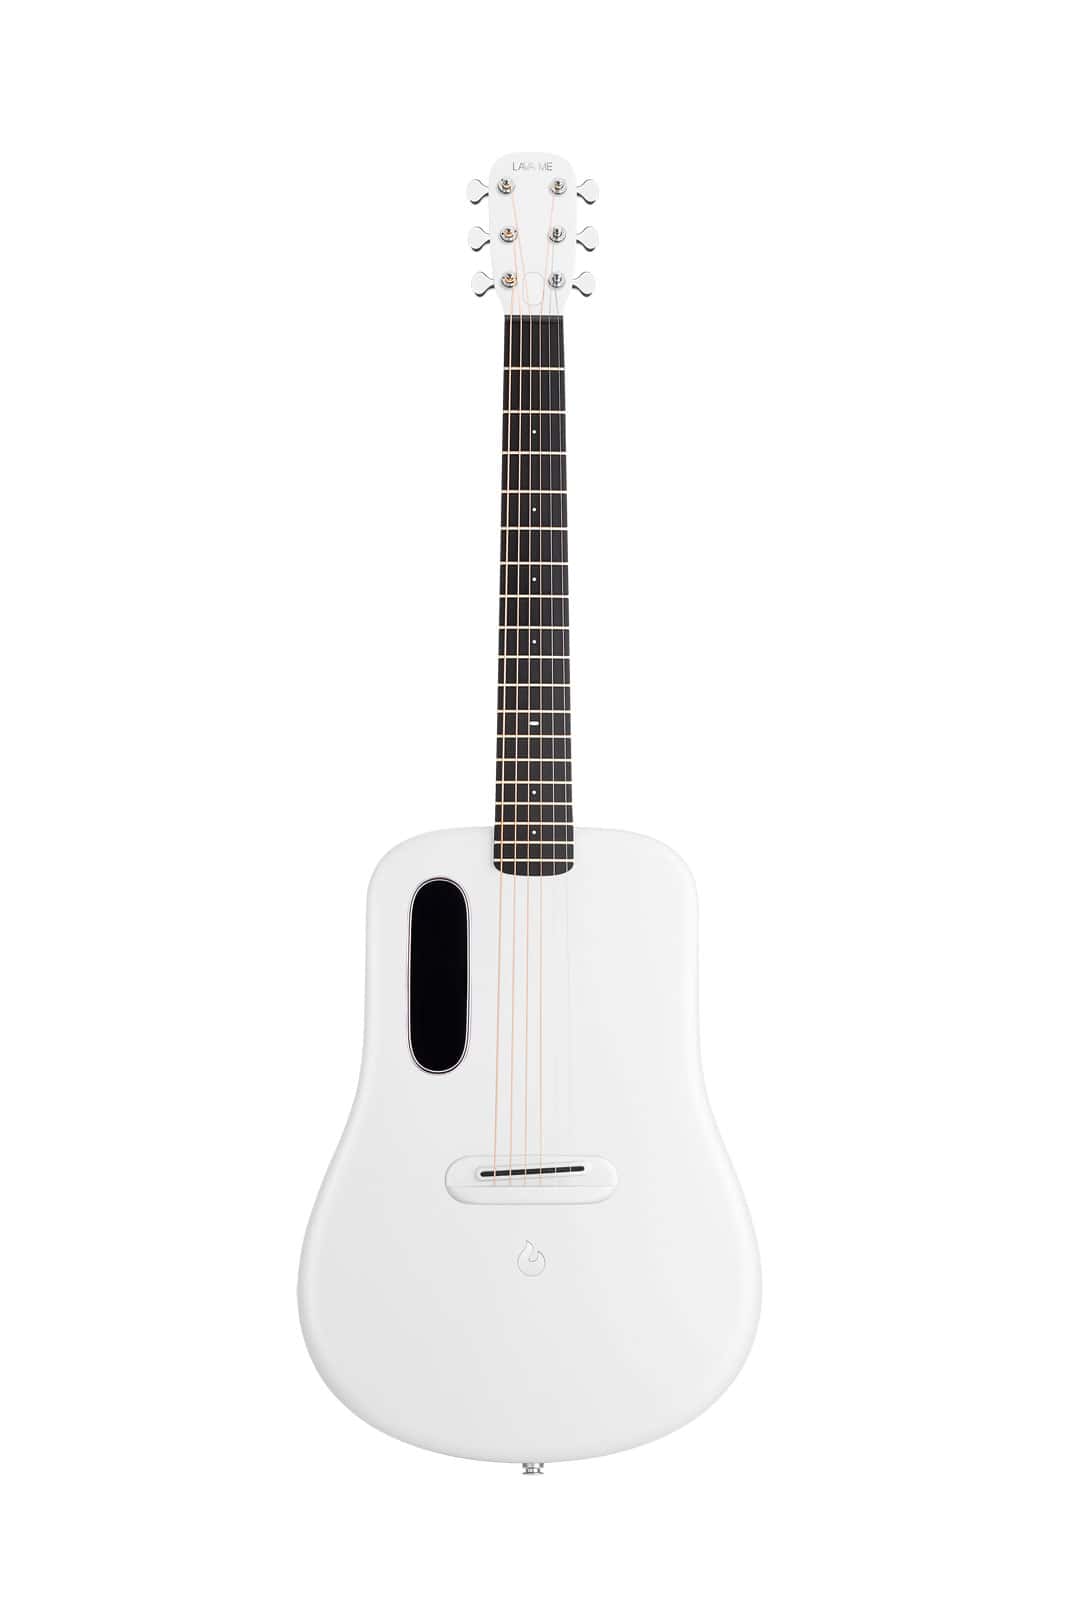 LAVA MUSIC LAVA ME 4 CARBON SERIES 38'' WHITE - WITH SPACE BAG